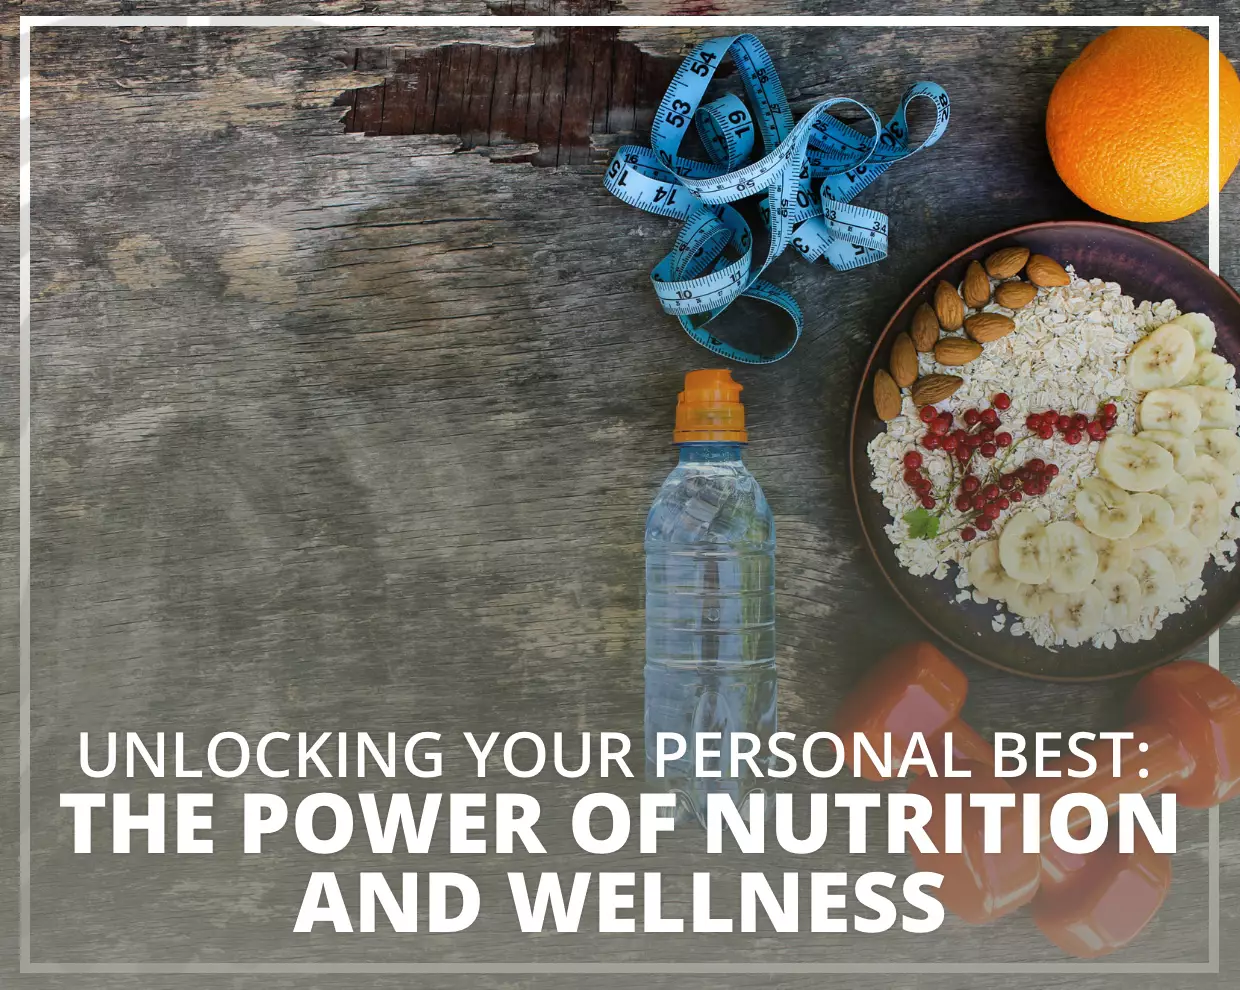 Unlocking Your Personal Best: The Power of Nutrition and Wellness